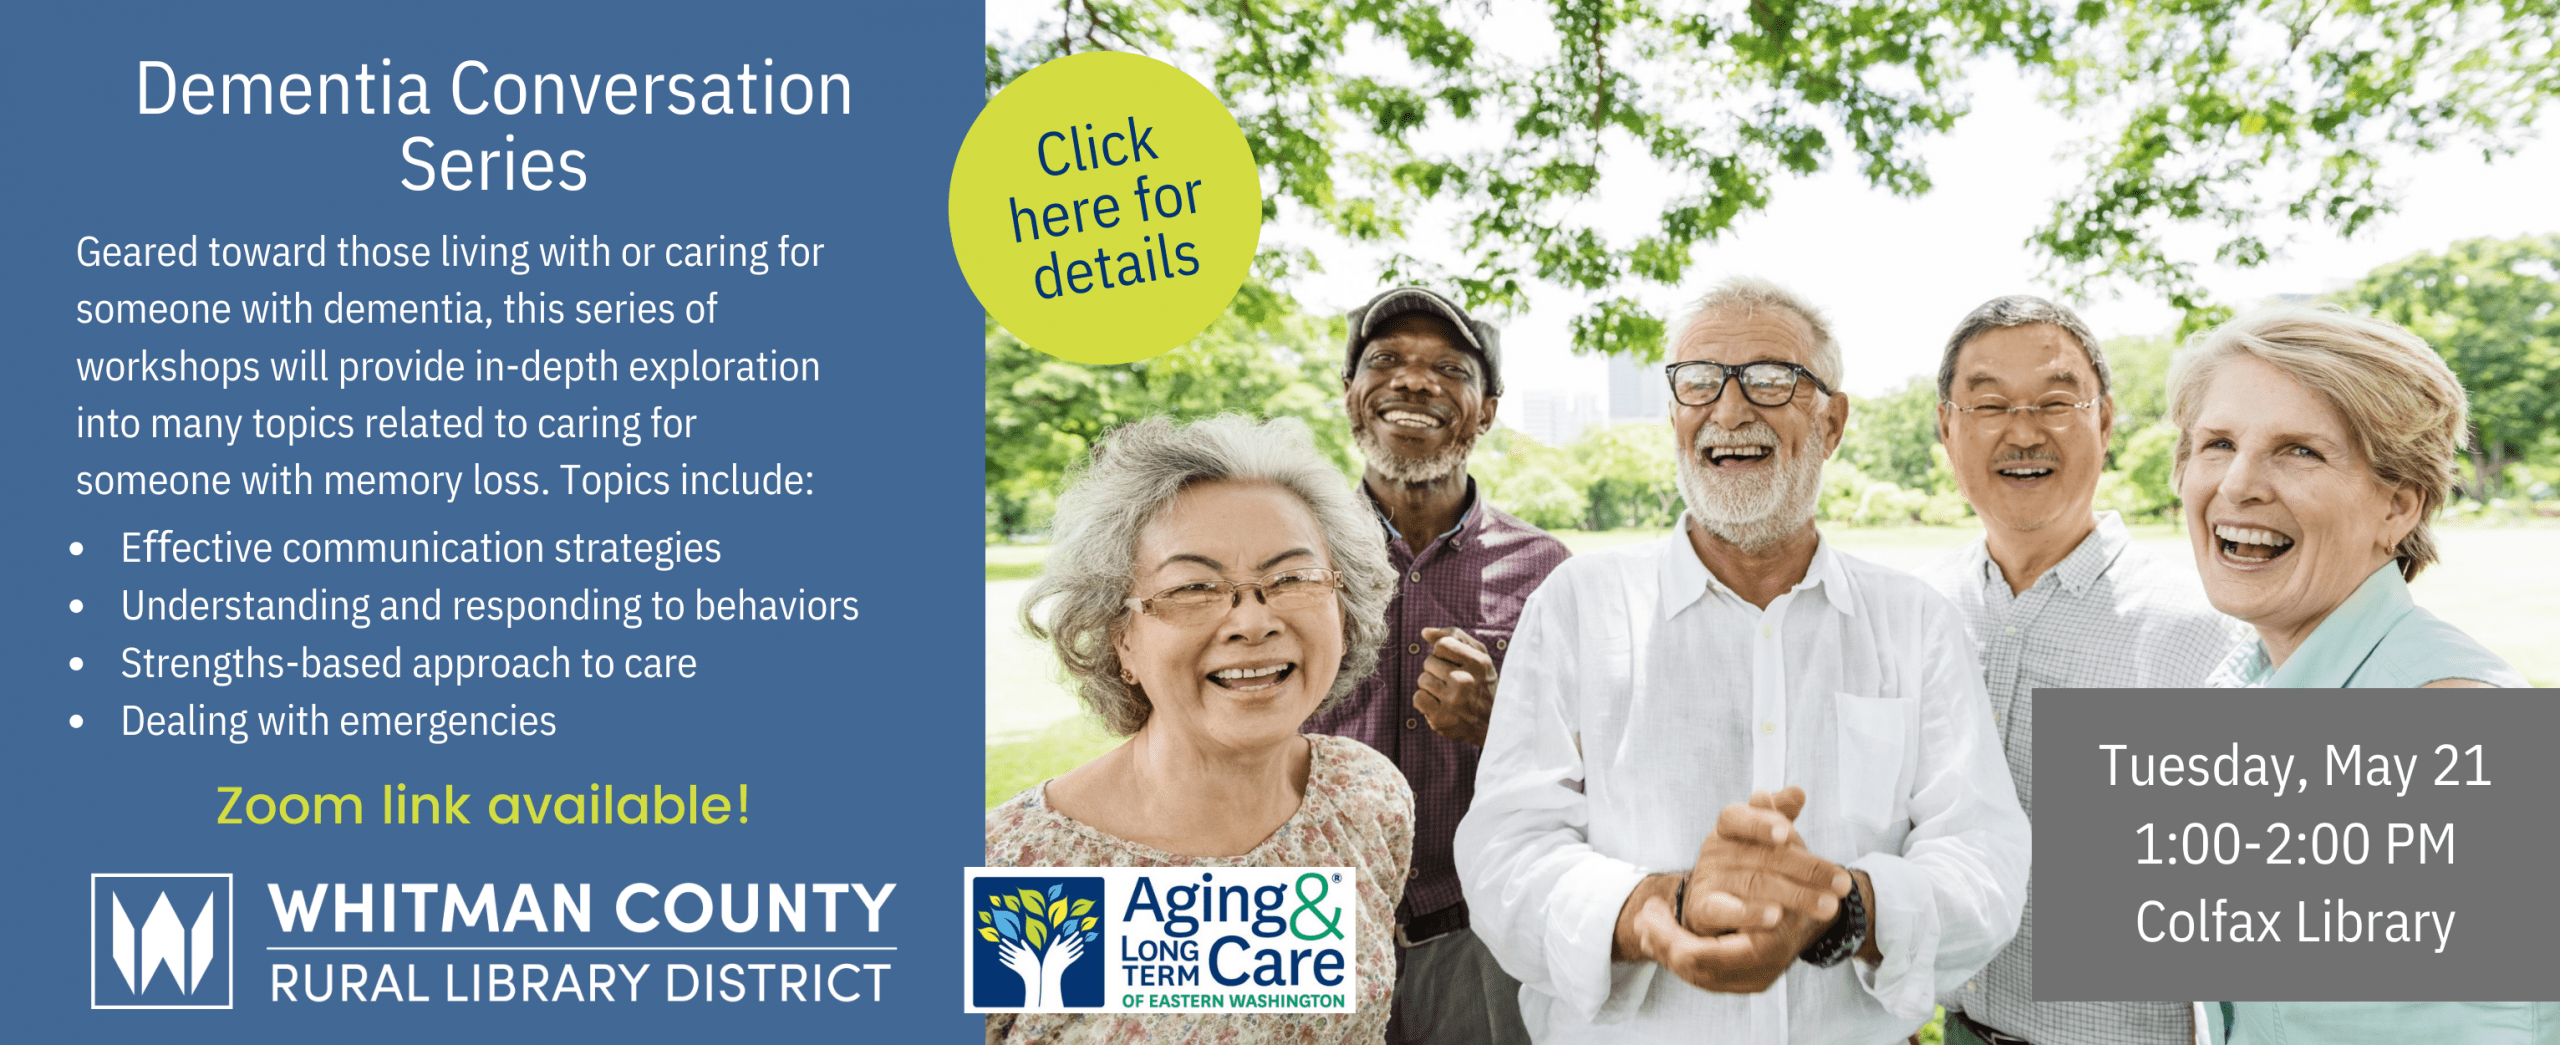 Join our Dementia Conversation series at any point, now through December on every third Tuesday of the month from 1-2 PM at the Colfax Library. Click here for details. Zoom link available upon request.